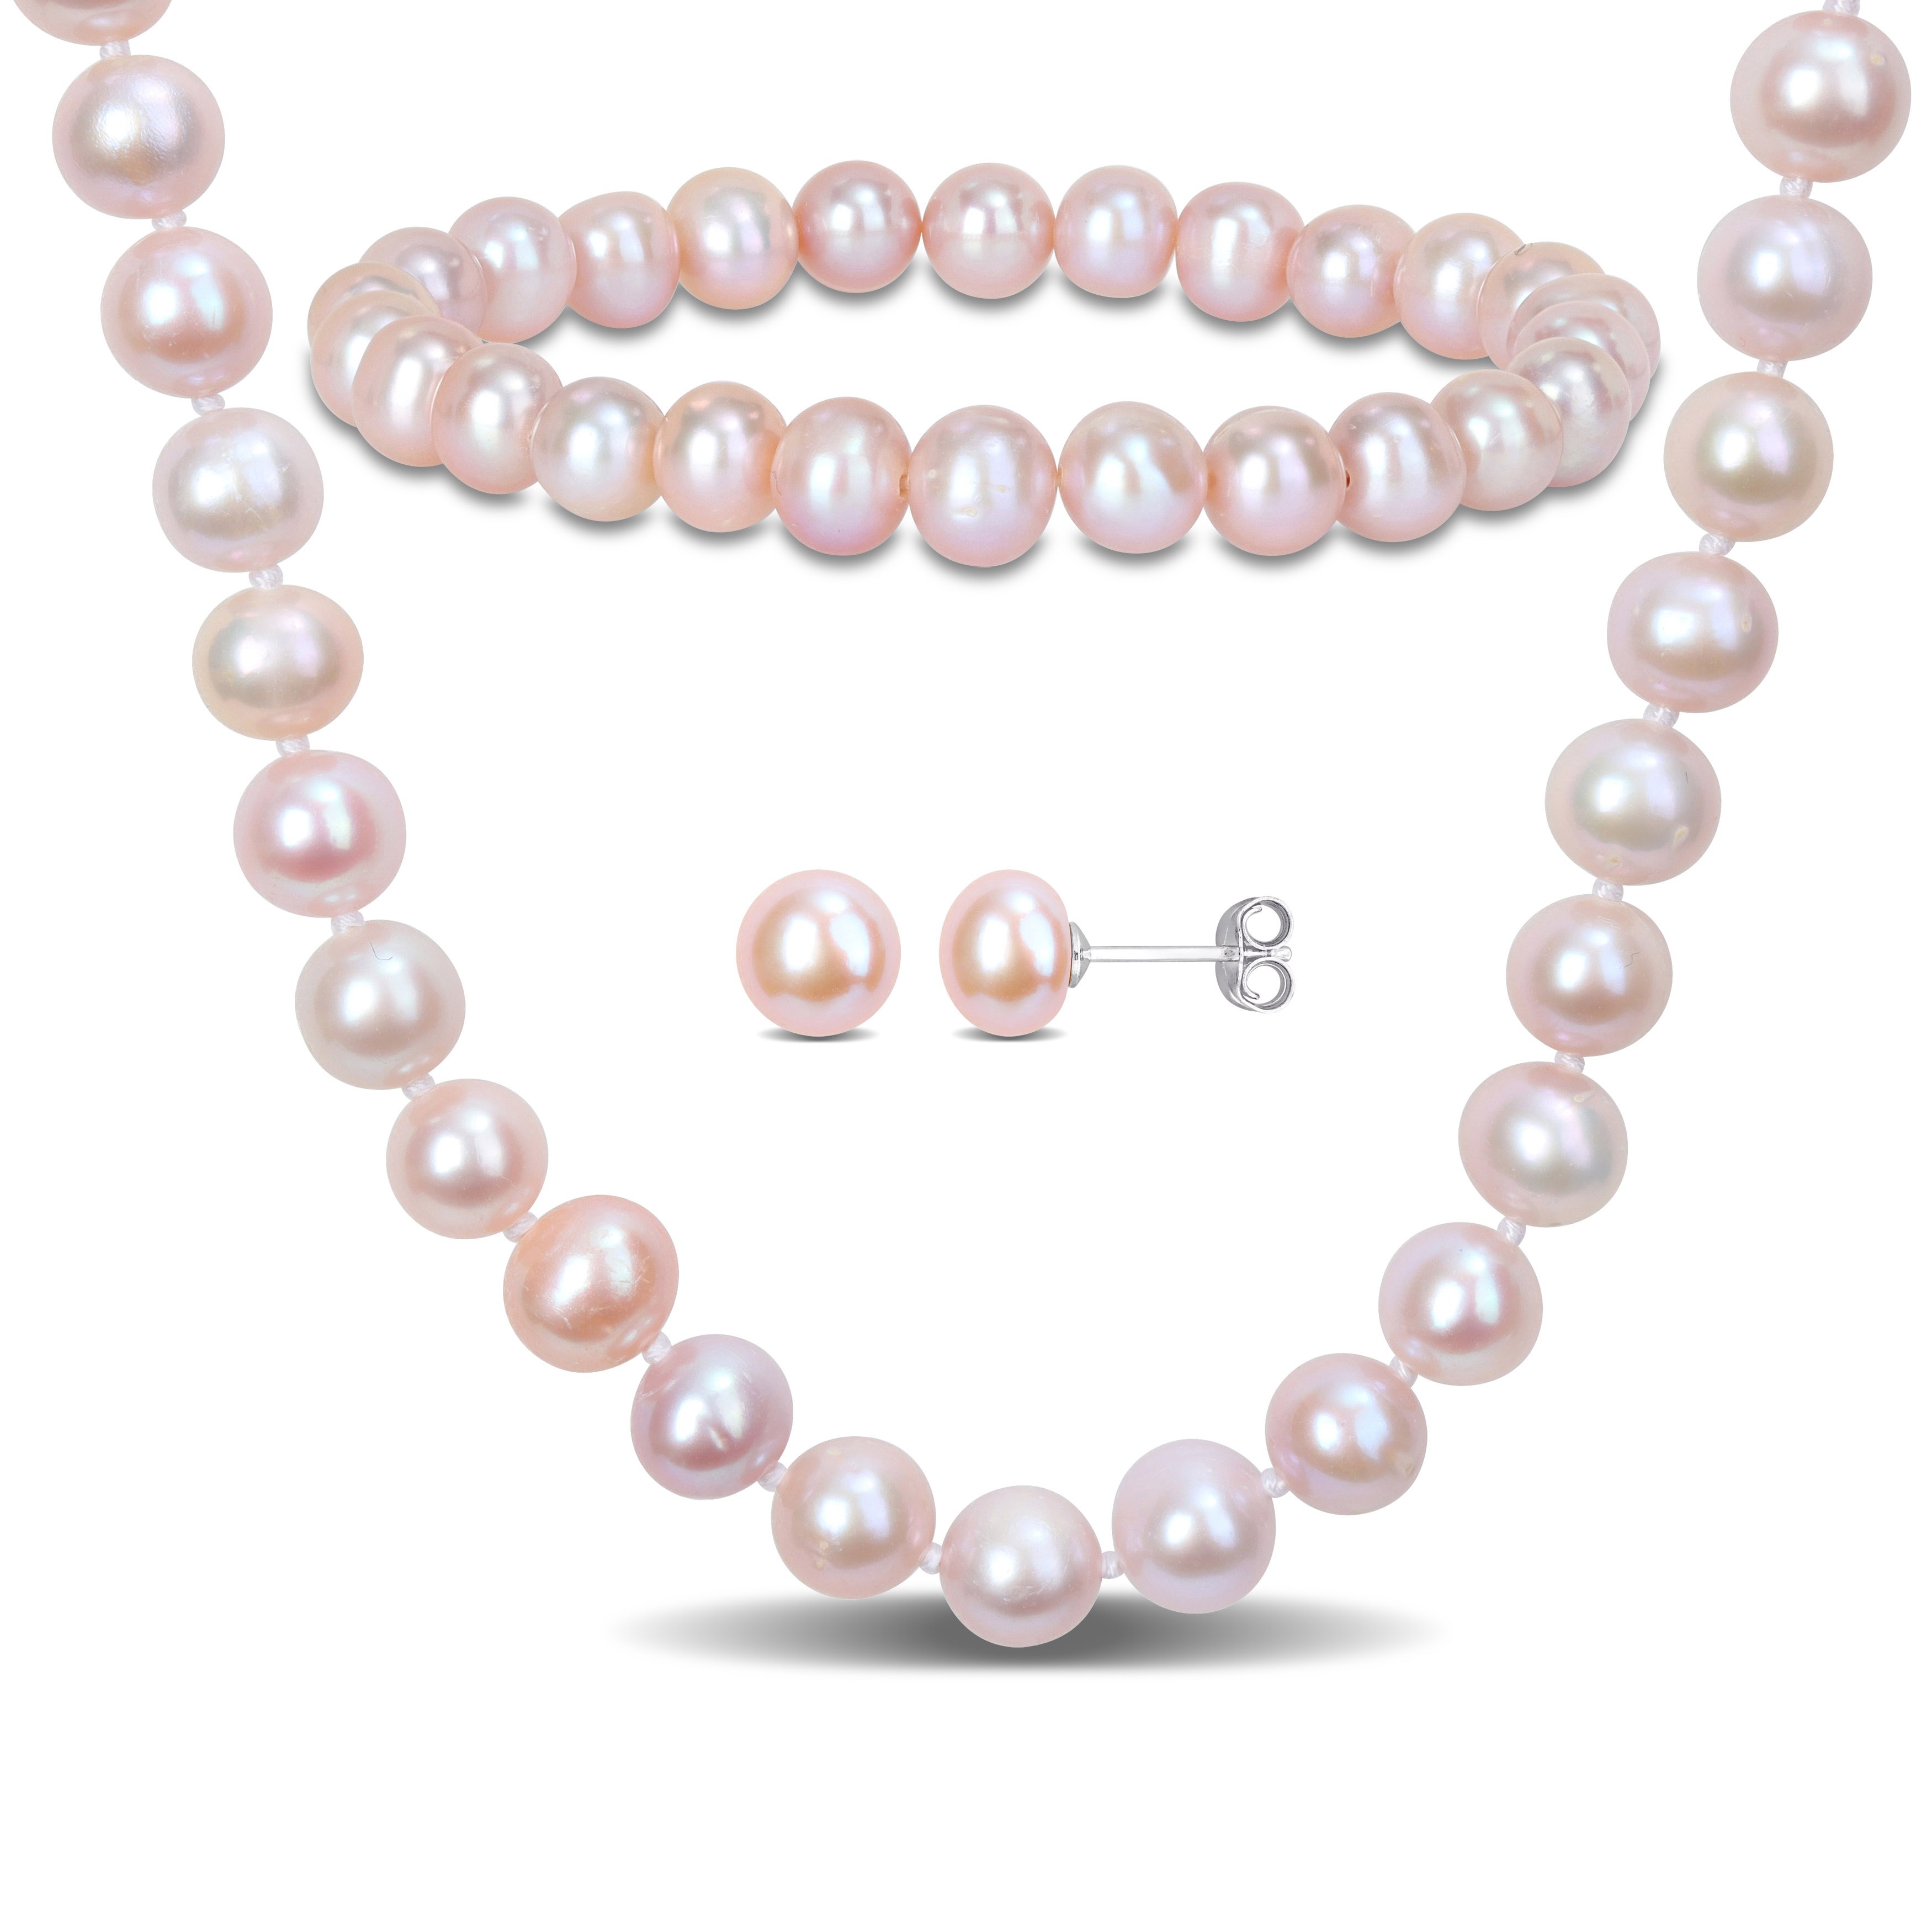 6.5-8 MM Pink Cultured Freshwater Pearl 3-Piece Set of Strand Necklace Stretch Bracelet and Stud Earrings in Sterling Silver